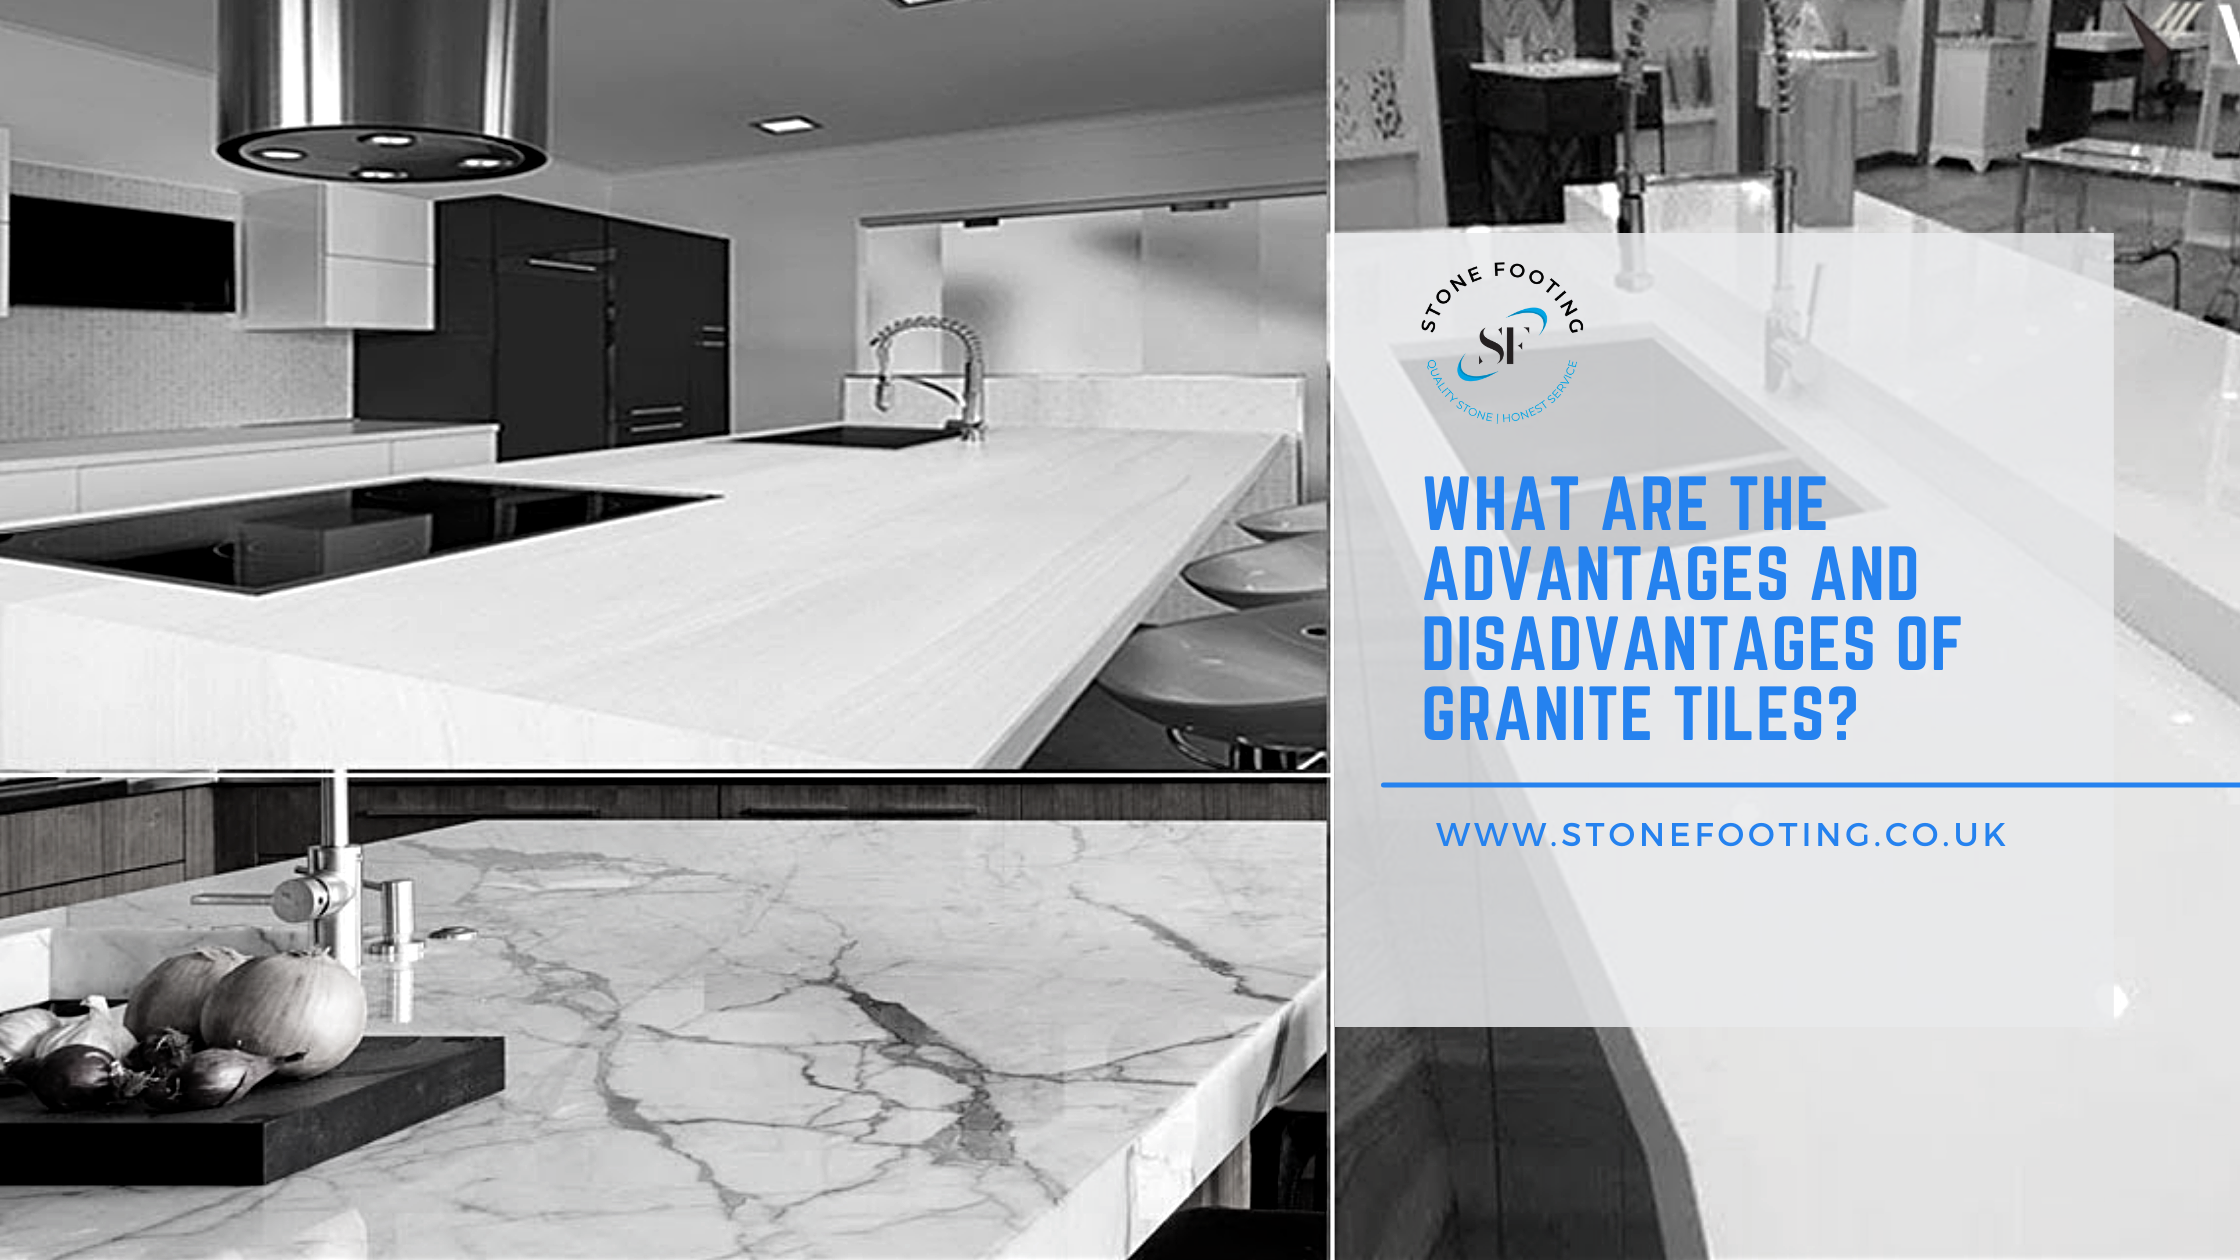 What Are The Advantages And Disadvantages Of Granite Tiles?